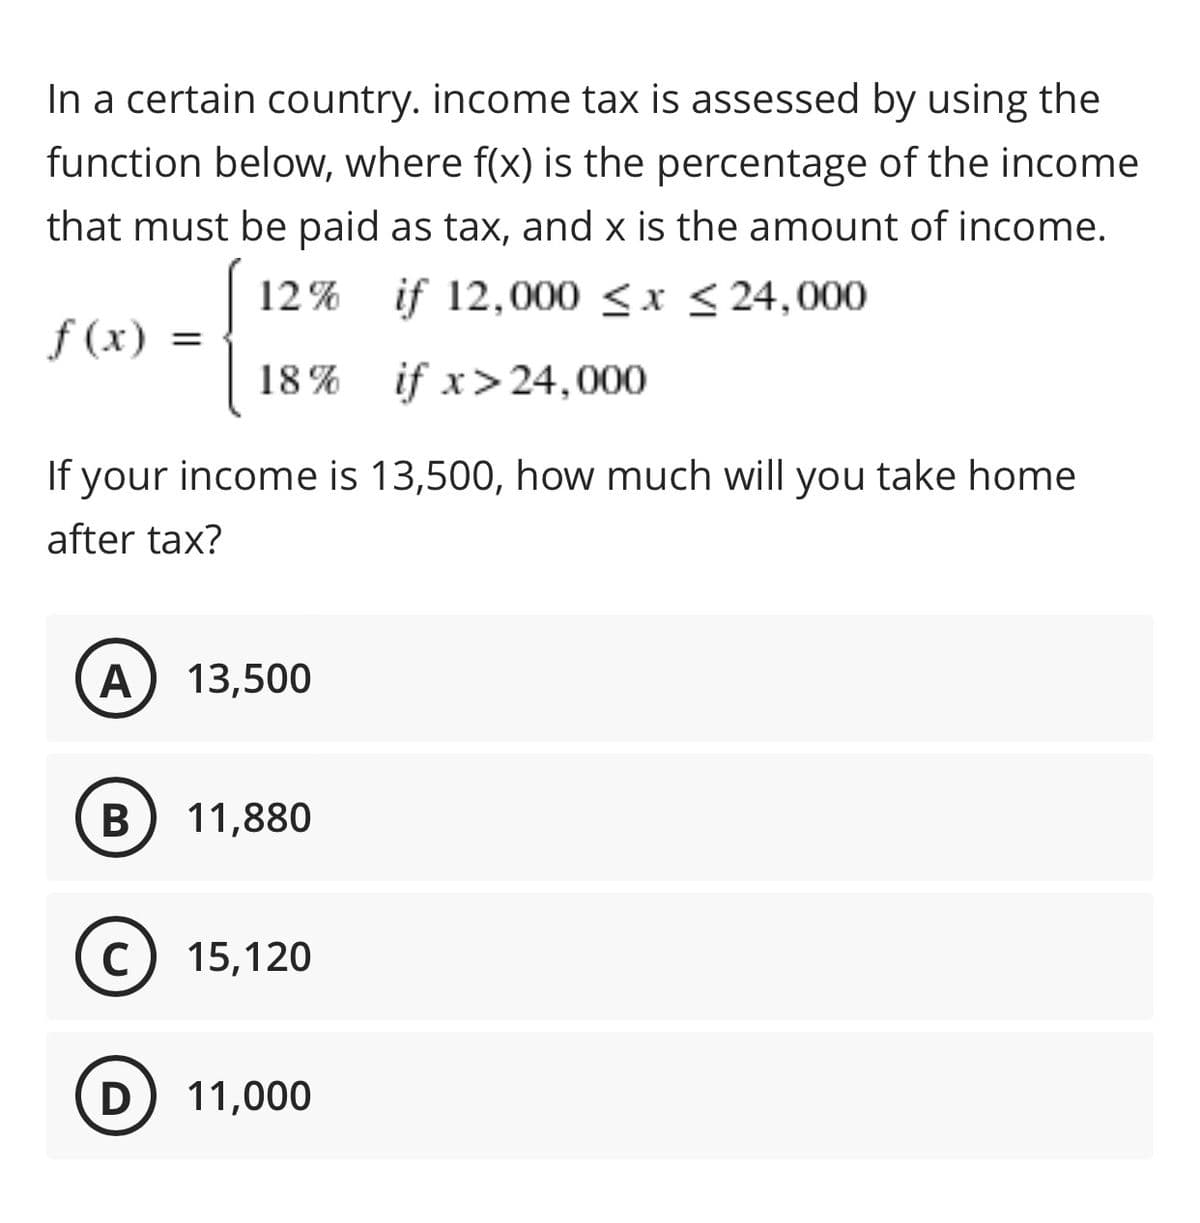 In a certain country. income tax is assessed by using the
function below, where f(x) is the percentage of the income
that must be paid as tax, and x is the amount of income.
if 12,000 ≤x≤24,000
12%
f(x) =
18%
if x > 24,000
If your income is 13,500, how much will you take home
after tax?
A 13,500
B
11,880
C 15,120
D 11,000